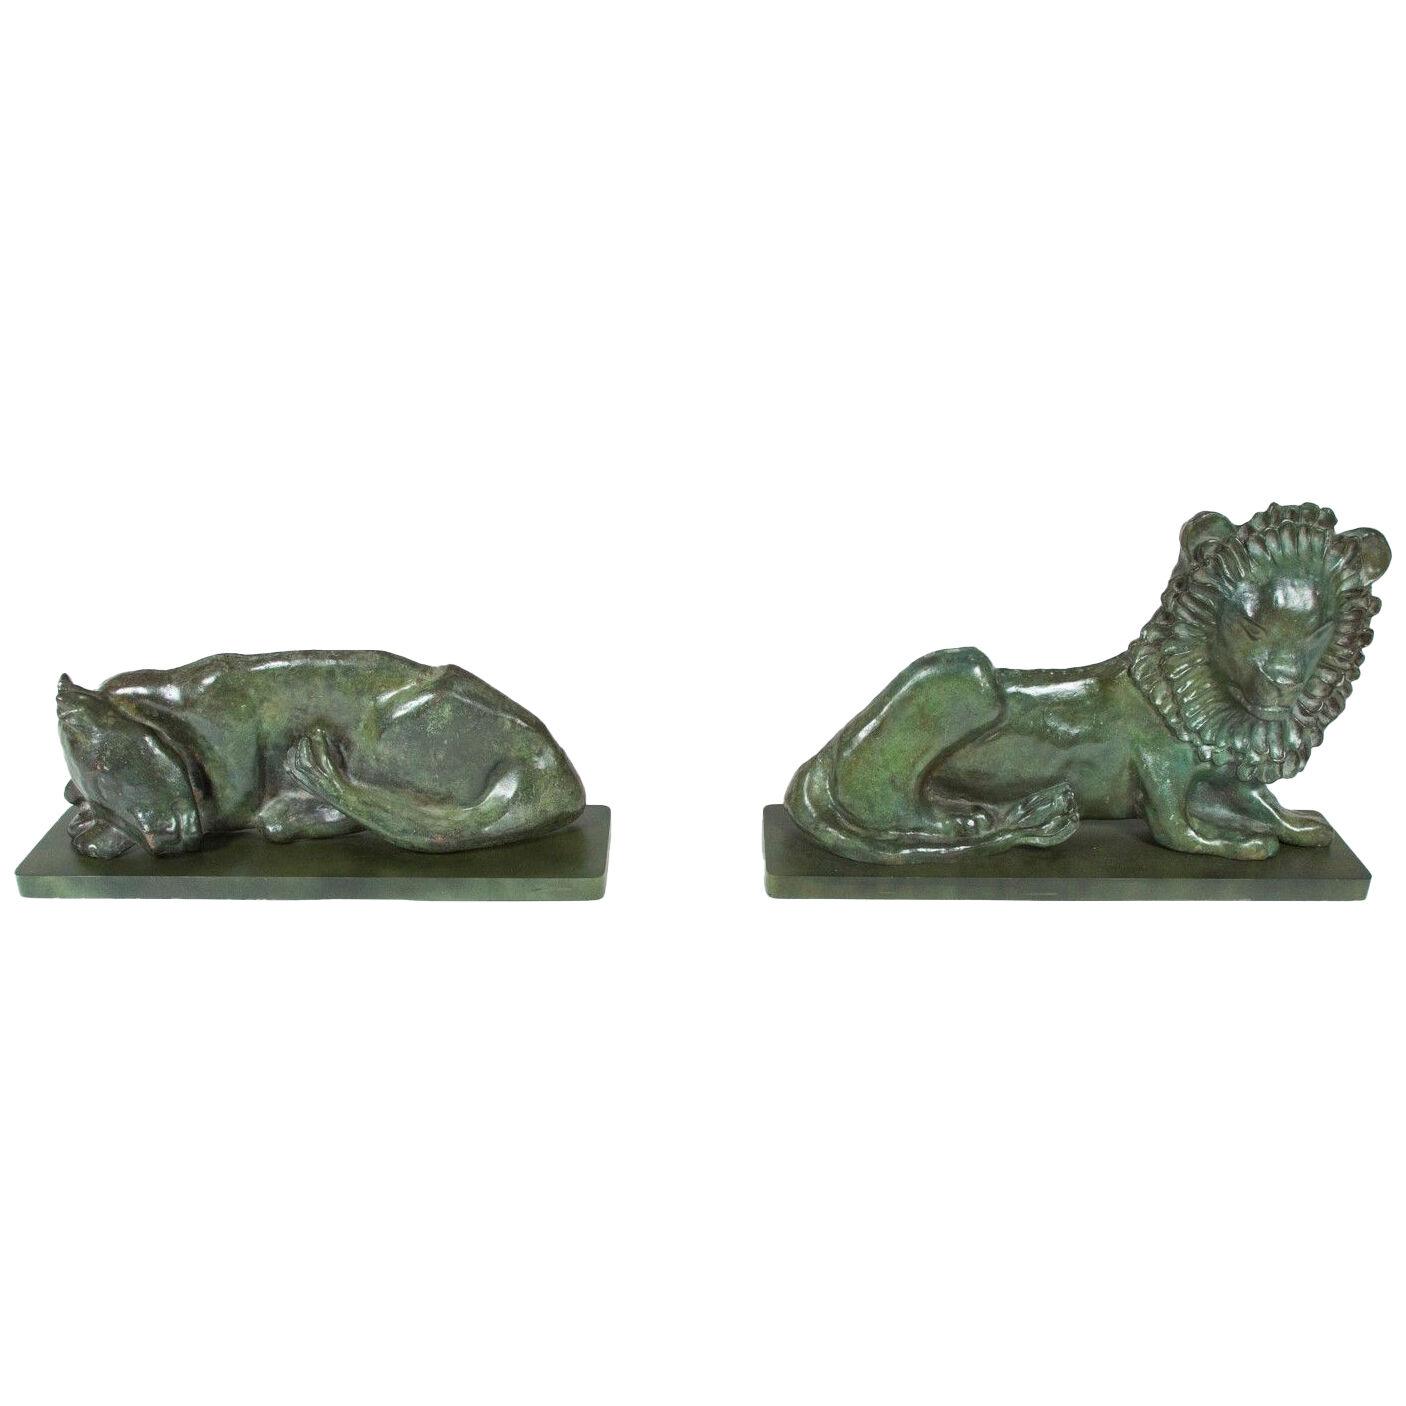 Bronzes of a Lion and sleeping Lioness